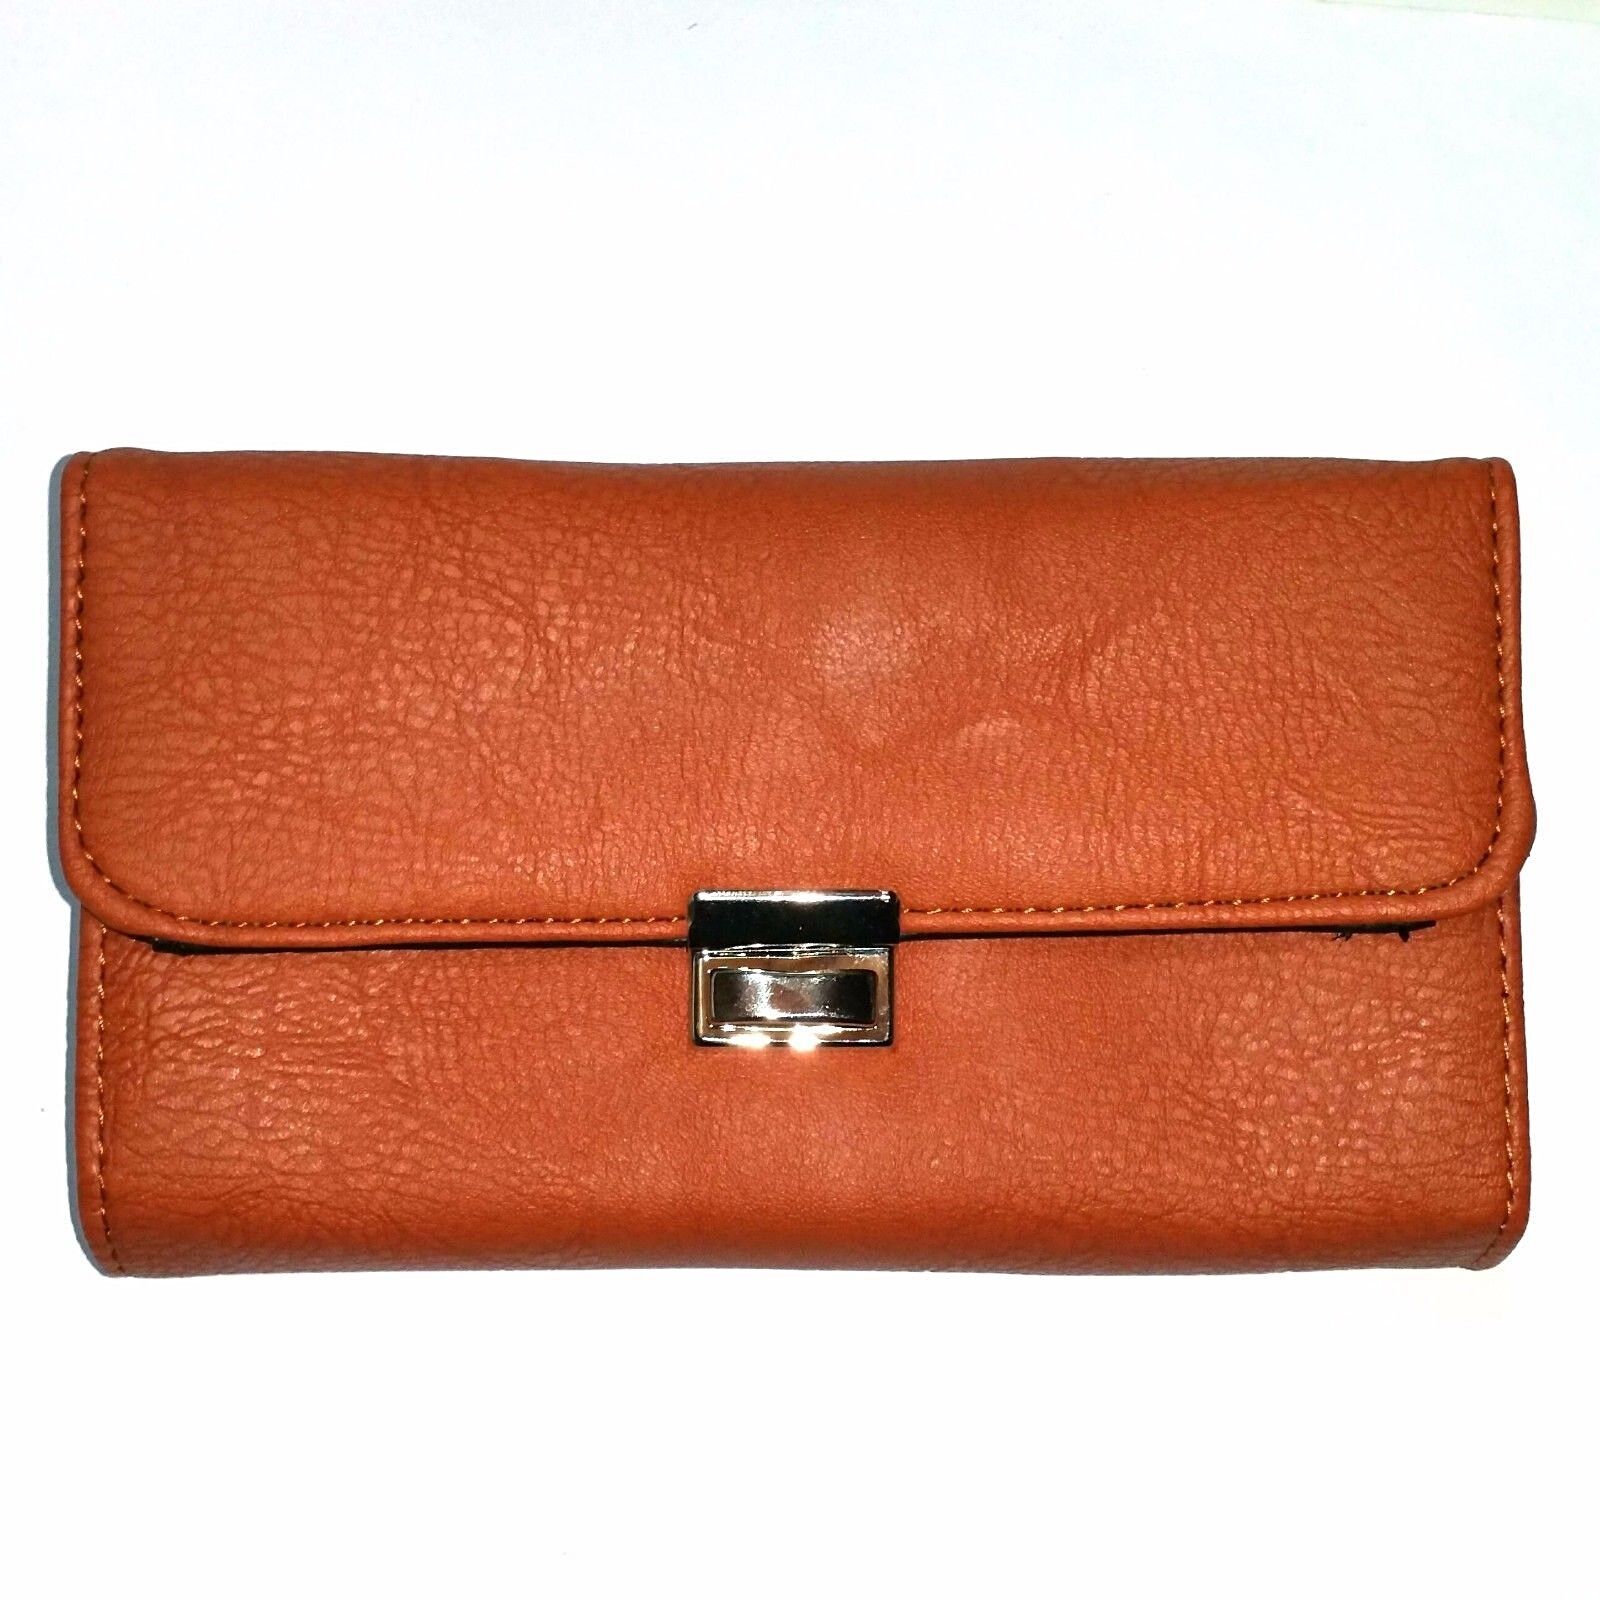 Waiter Pocket purse Taxi Purse Weekly update Money Bag Max 44% OFF Wallet Wal